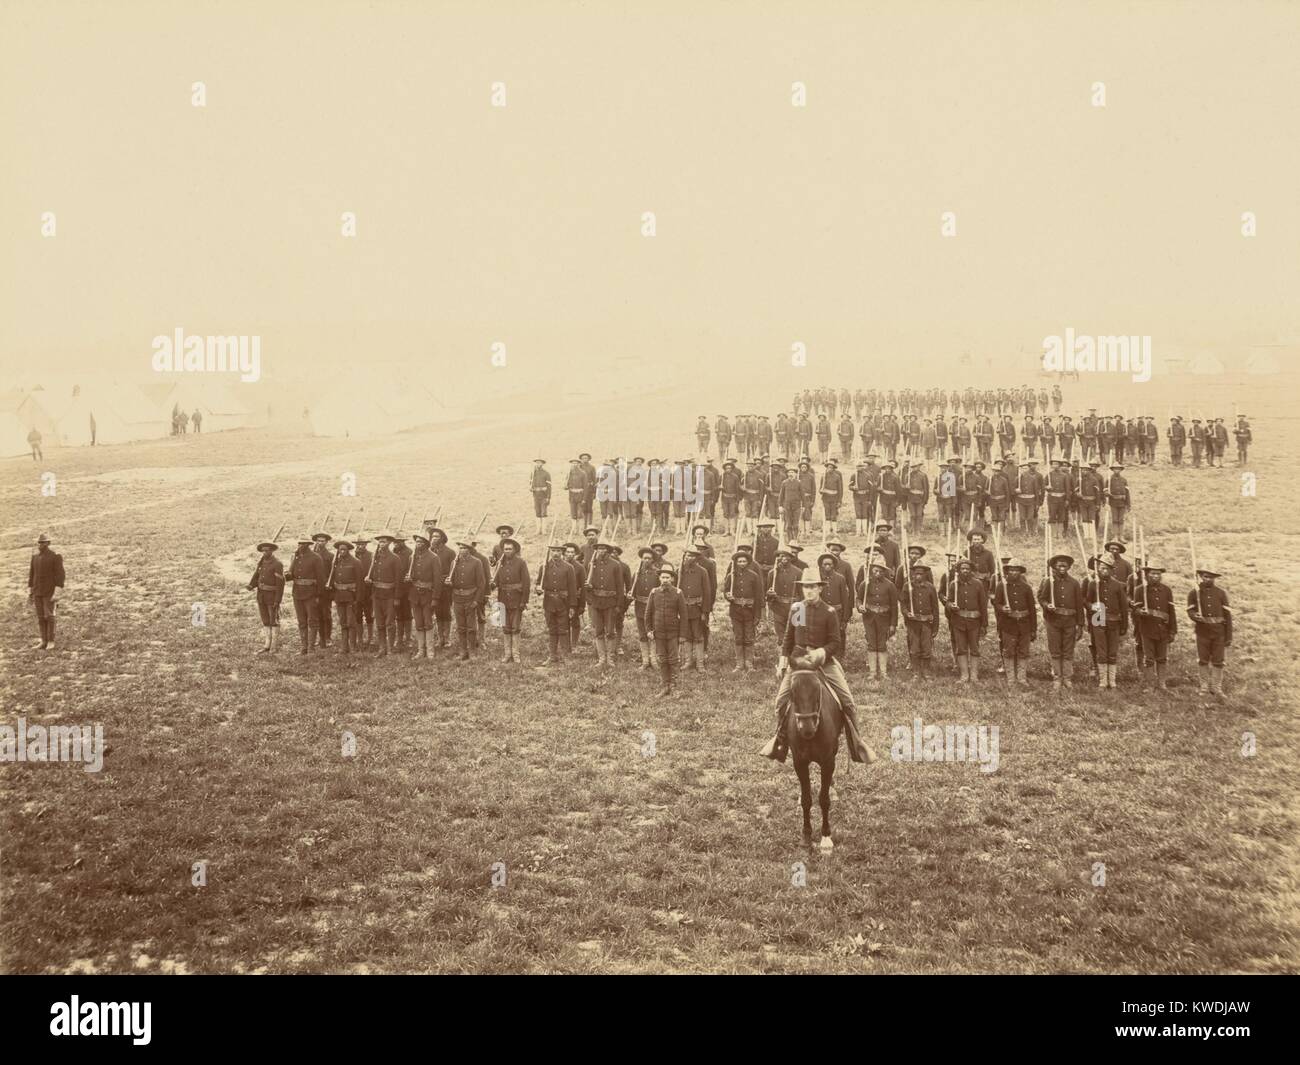 African American soldiers in formation at Camp Meade, Pennsylvania, May 1899. African Americans, most from the southern states, volunteered hoping that military service would improve their civil rights. In Cuba they were called the Immunes due to their under 10% rates of yellow fever, compared to the 75% for white soldiers (BSLOC 2017 10 14) Stock Photo